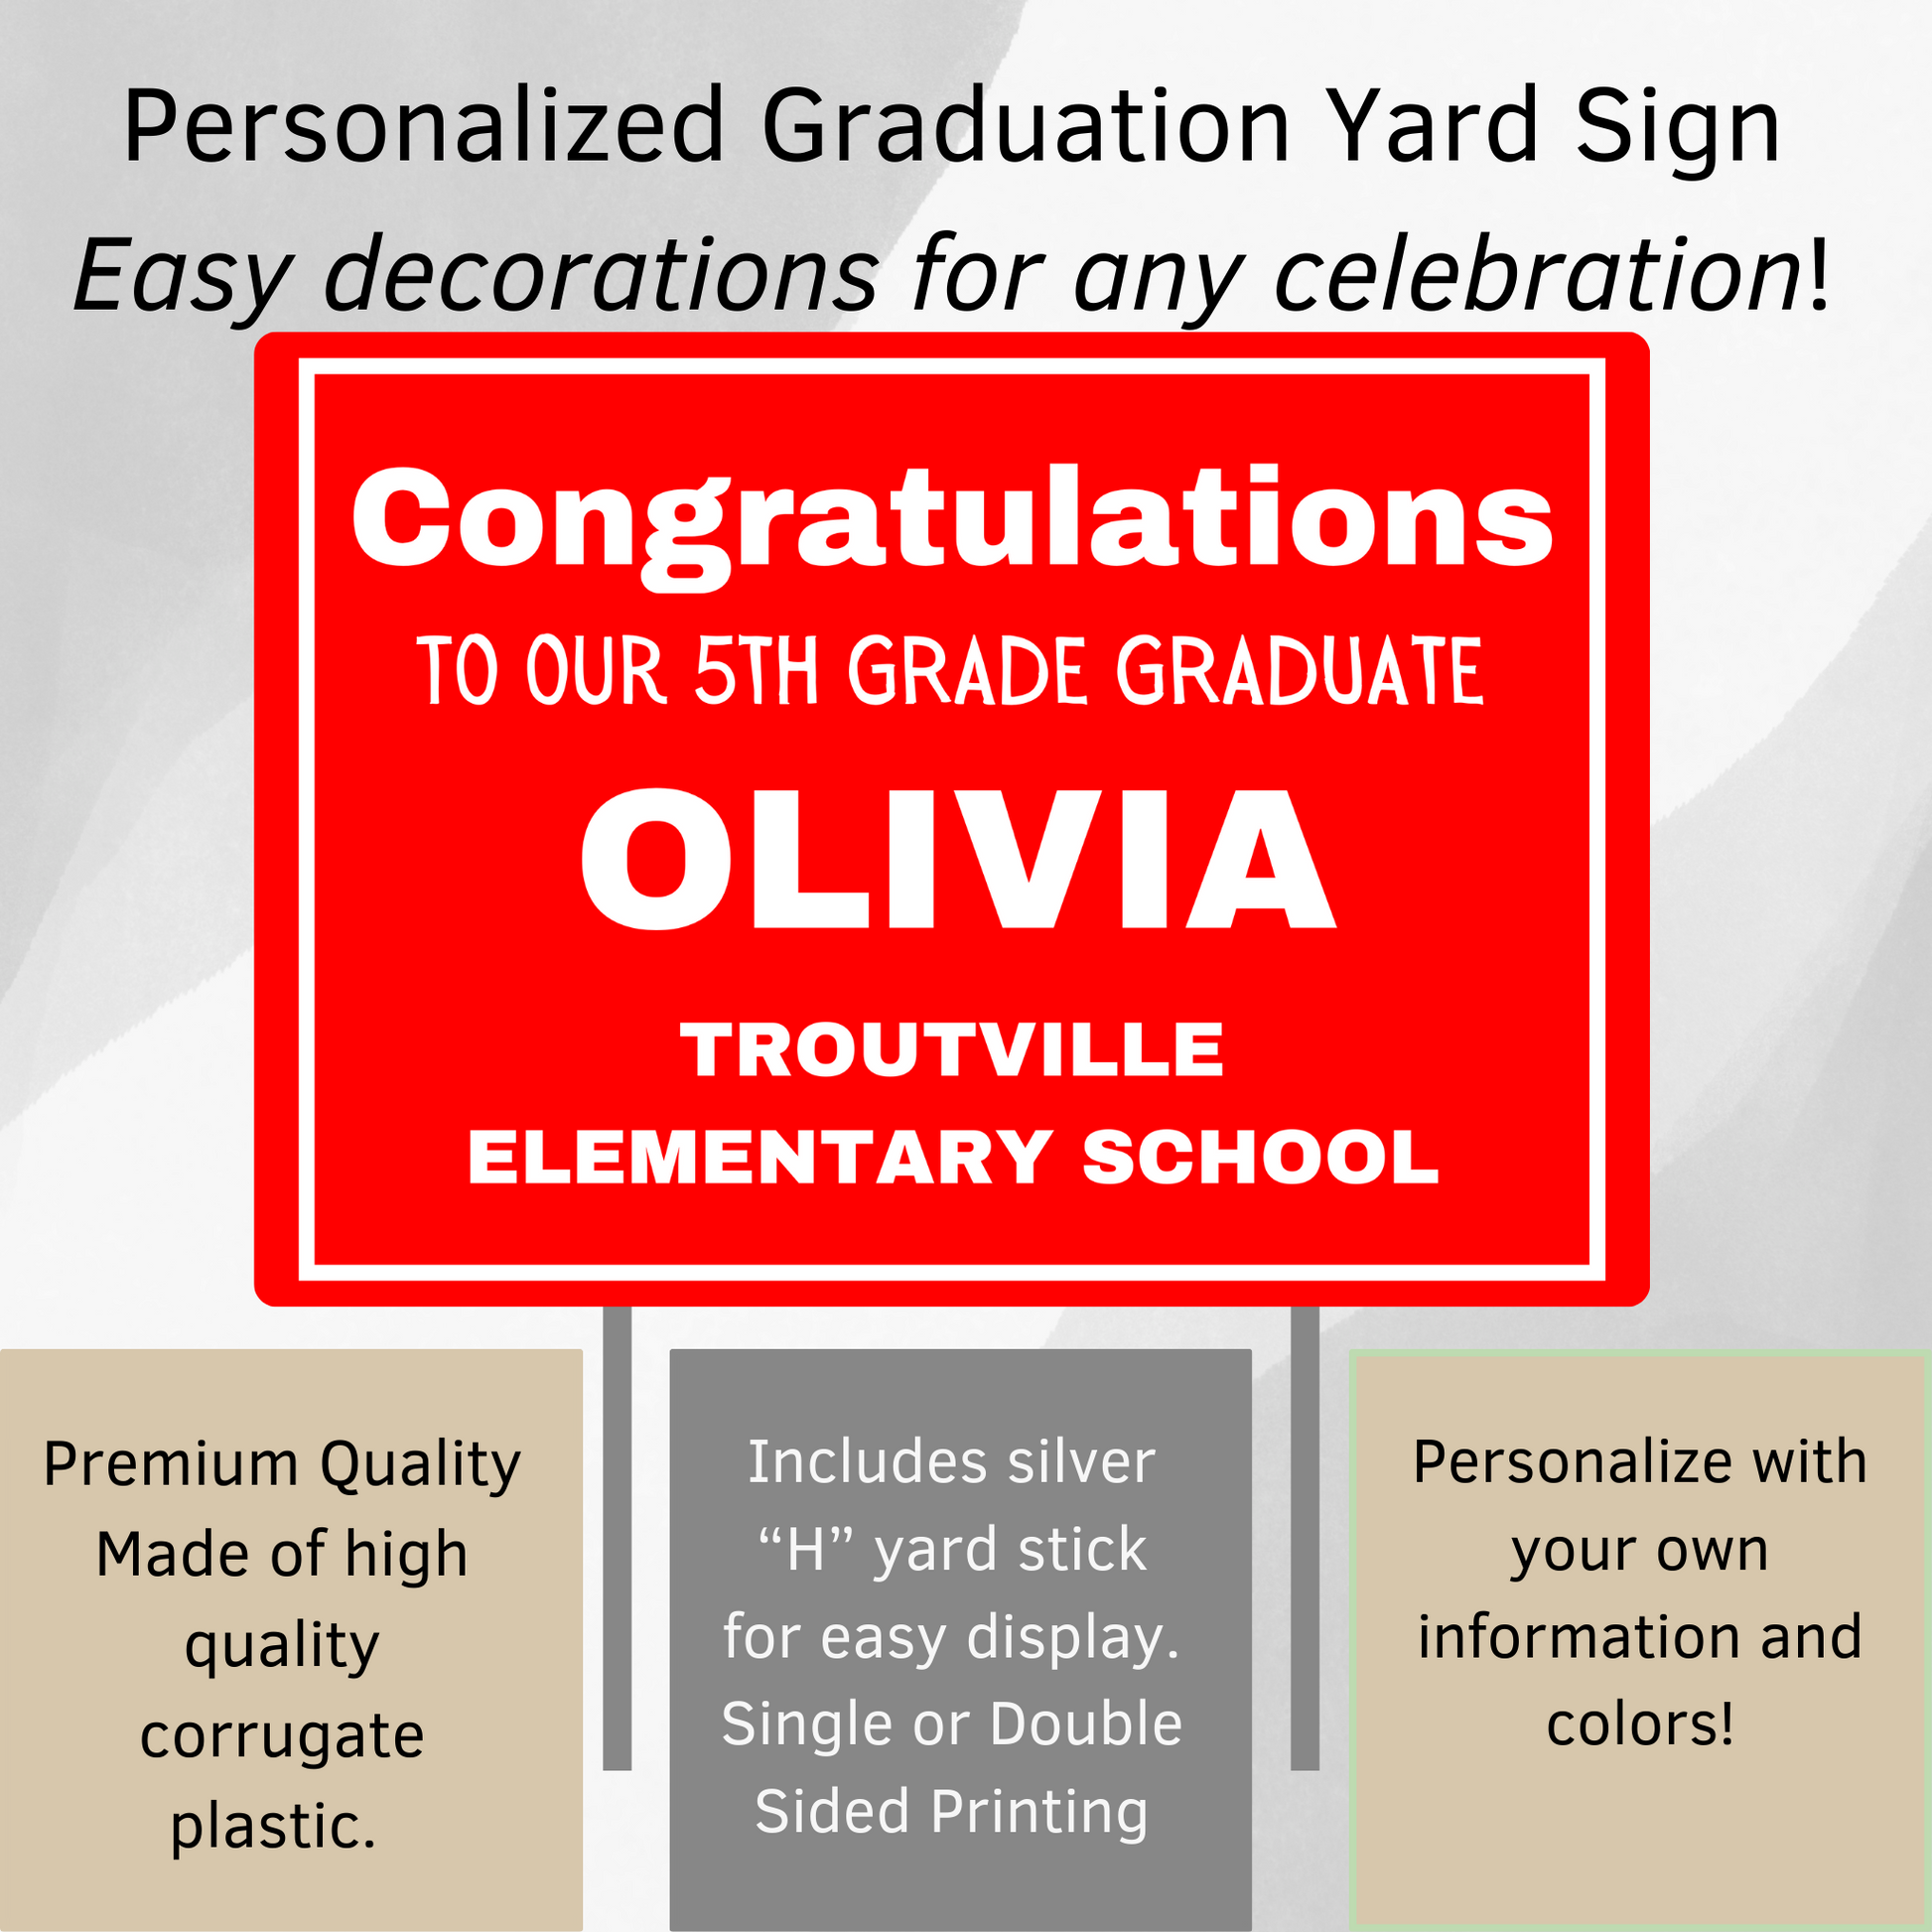 Personalized Graduation Yard Sign. Easy decoration for any celebration. Made of high quality corrugate plastic and easy to personalize.  Includes metal "H" yard stick.